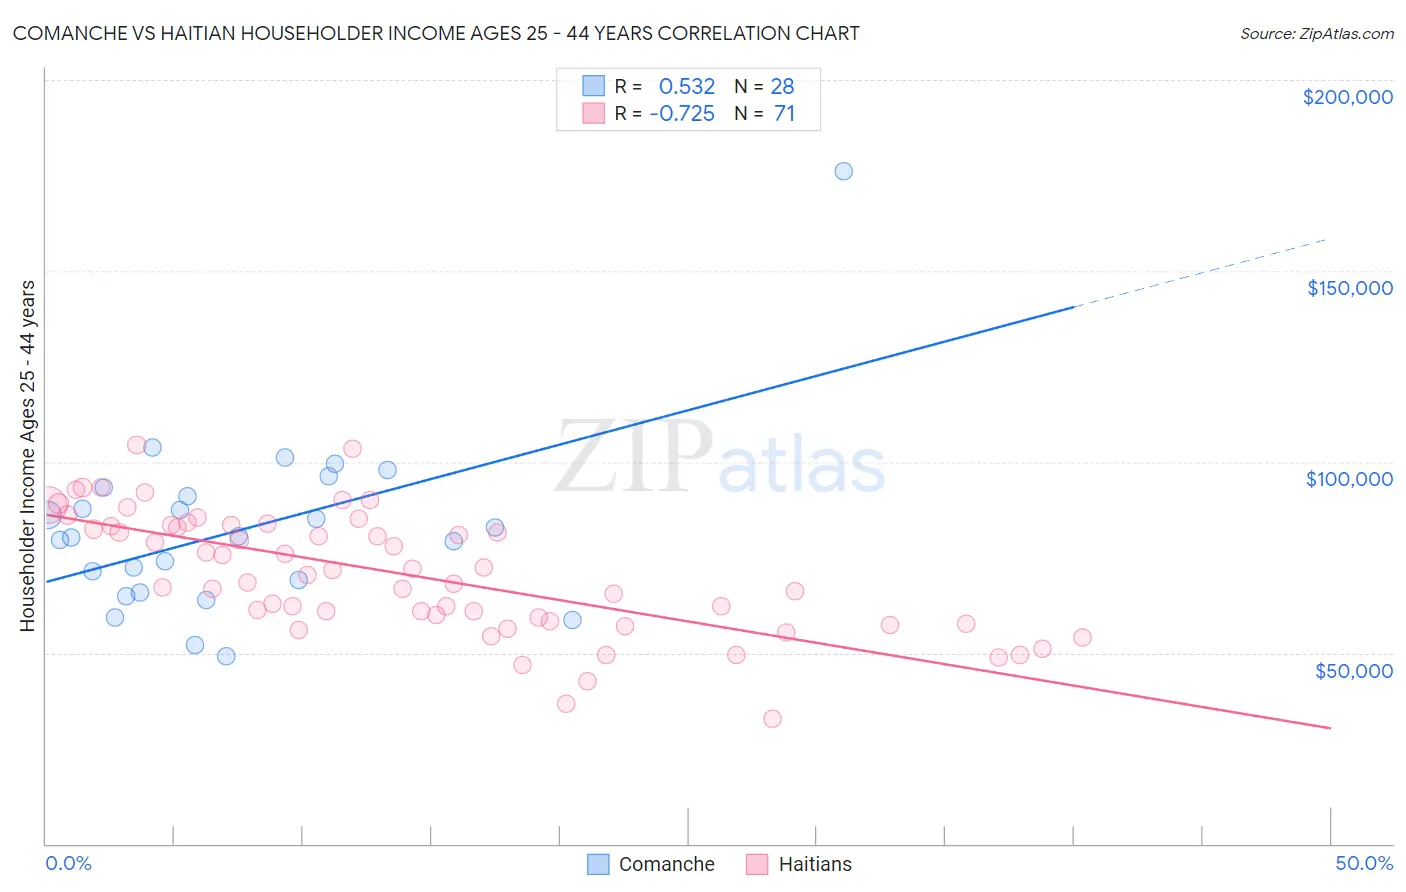 Comanche vs Haitian Householder Income Ages 25 - 44 years